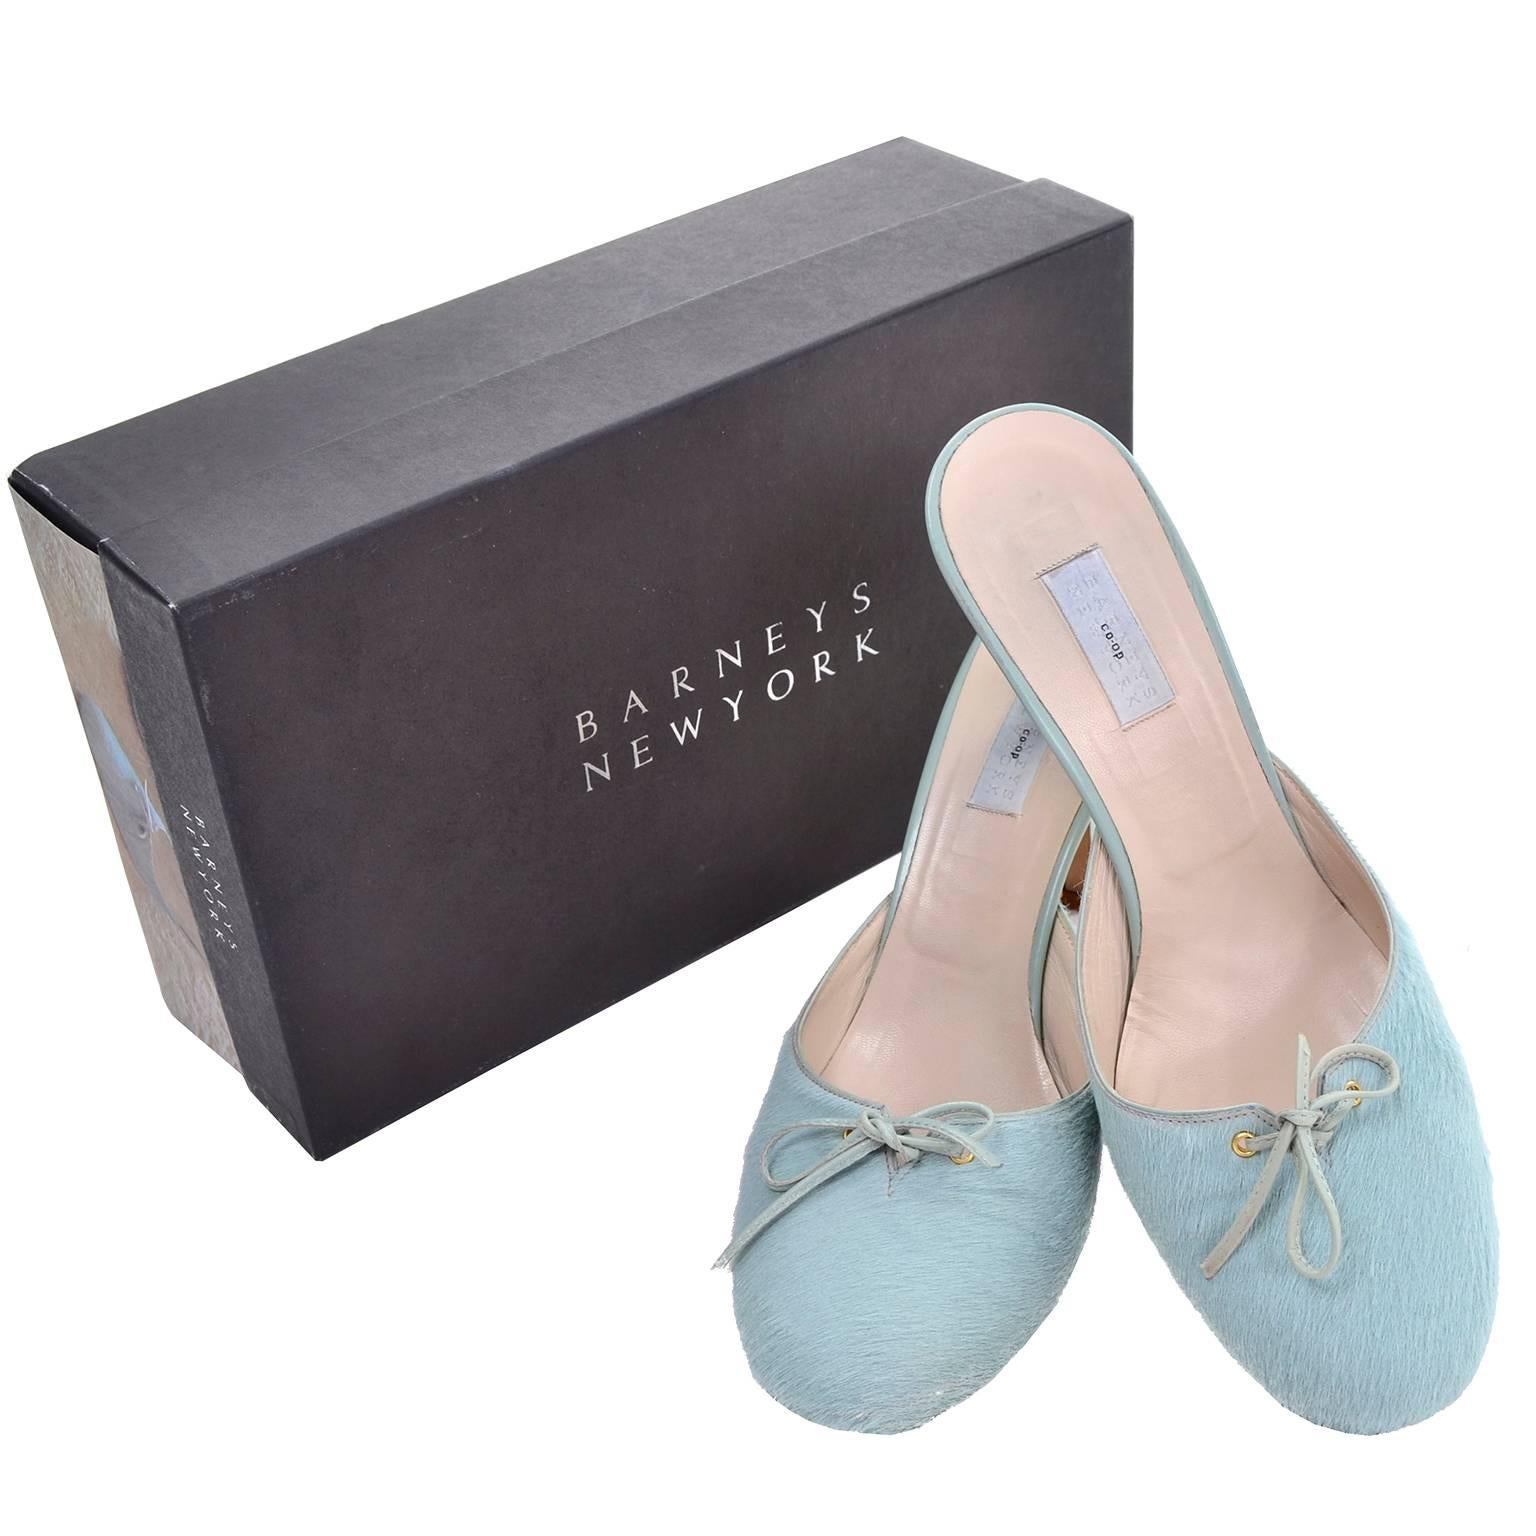 These Barney's New York blue pony fur backless mules or slides have leather trim heels and pretty leather bows. These shoes are labeled a size 37 and were made in Italy. These are 3.25